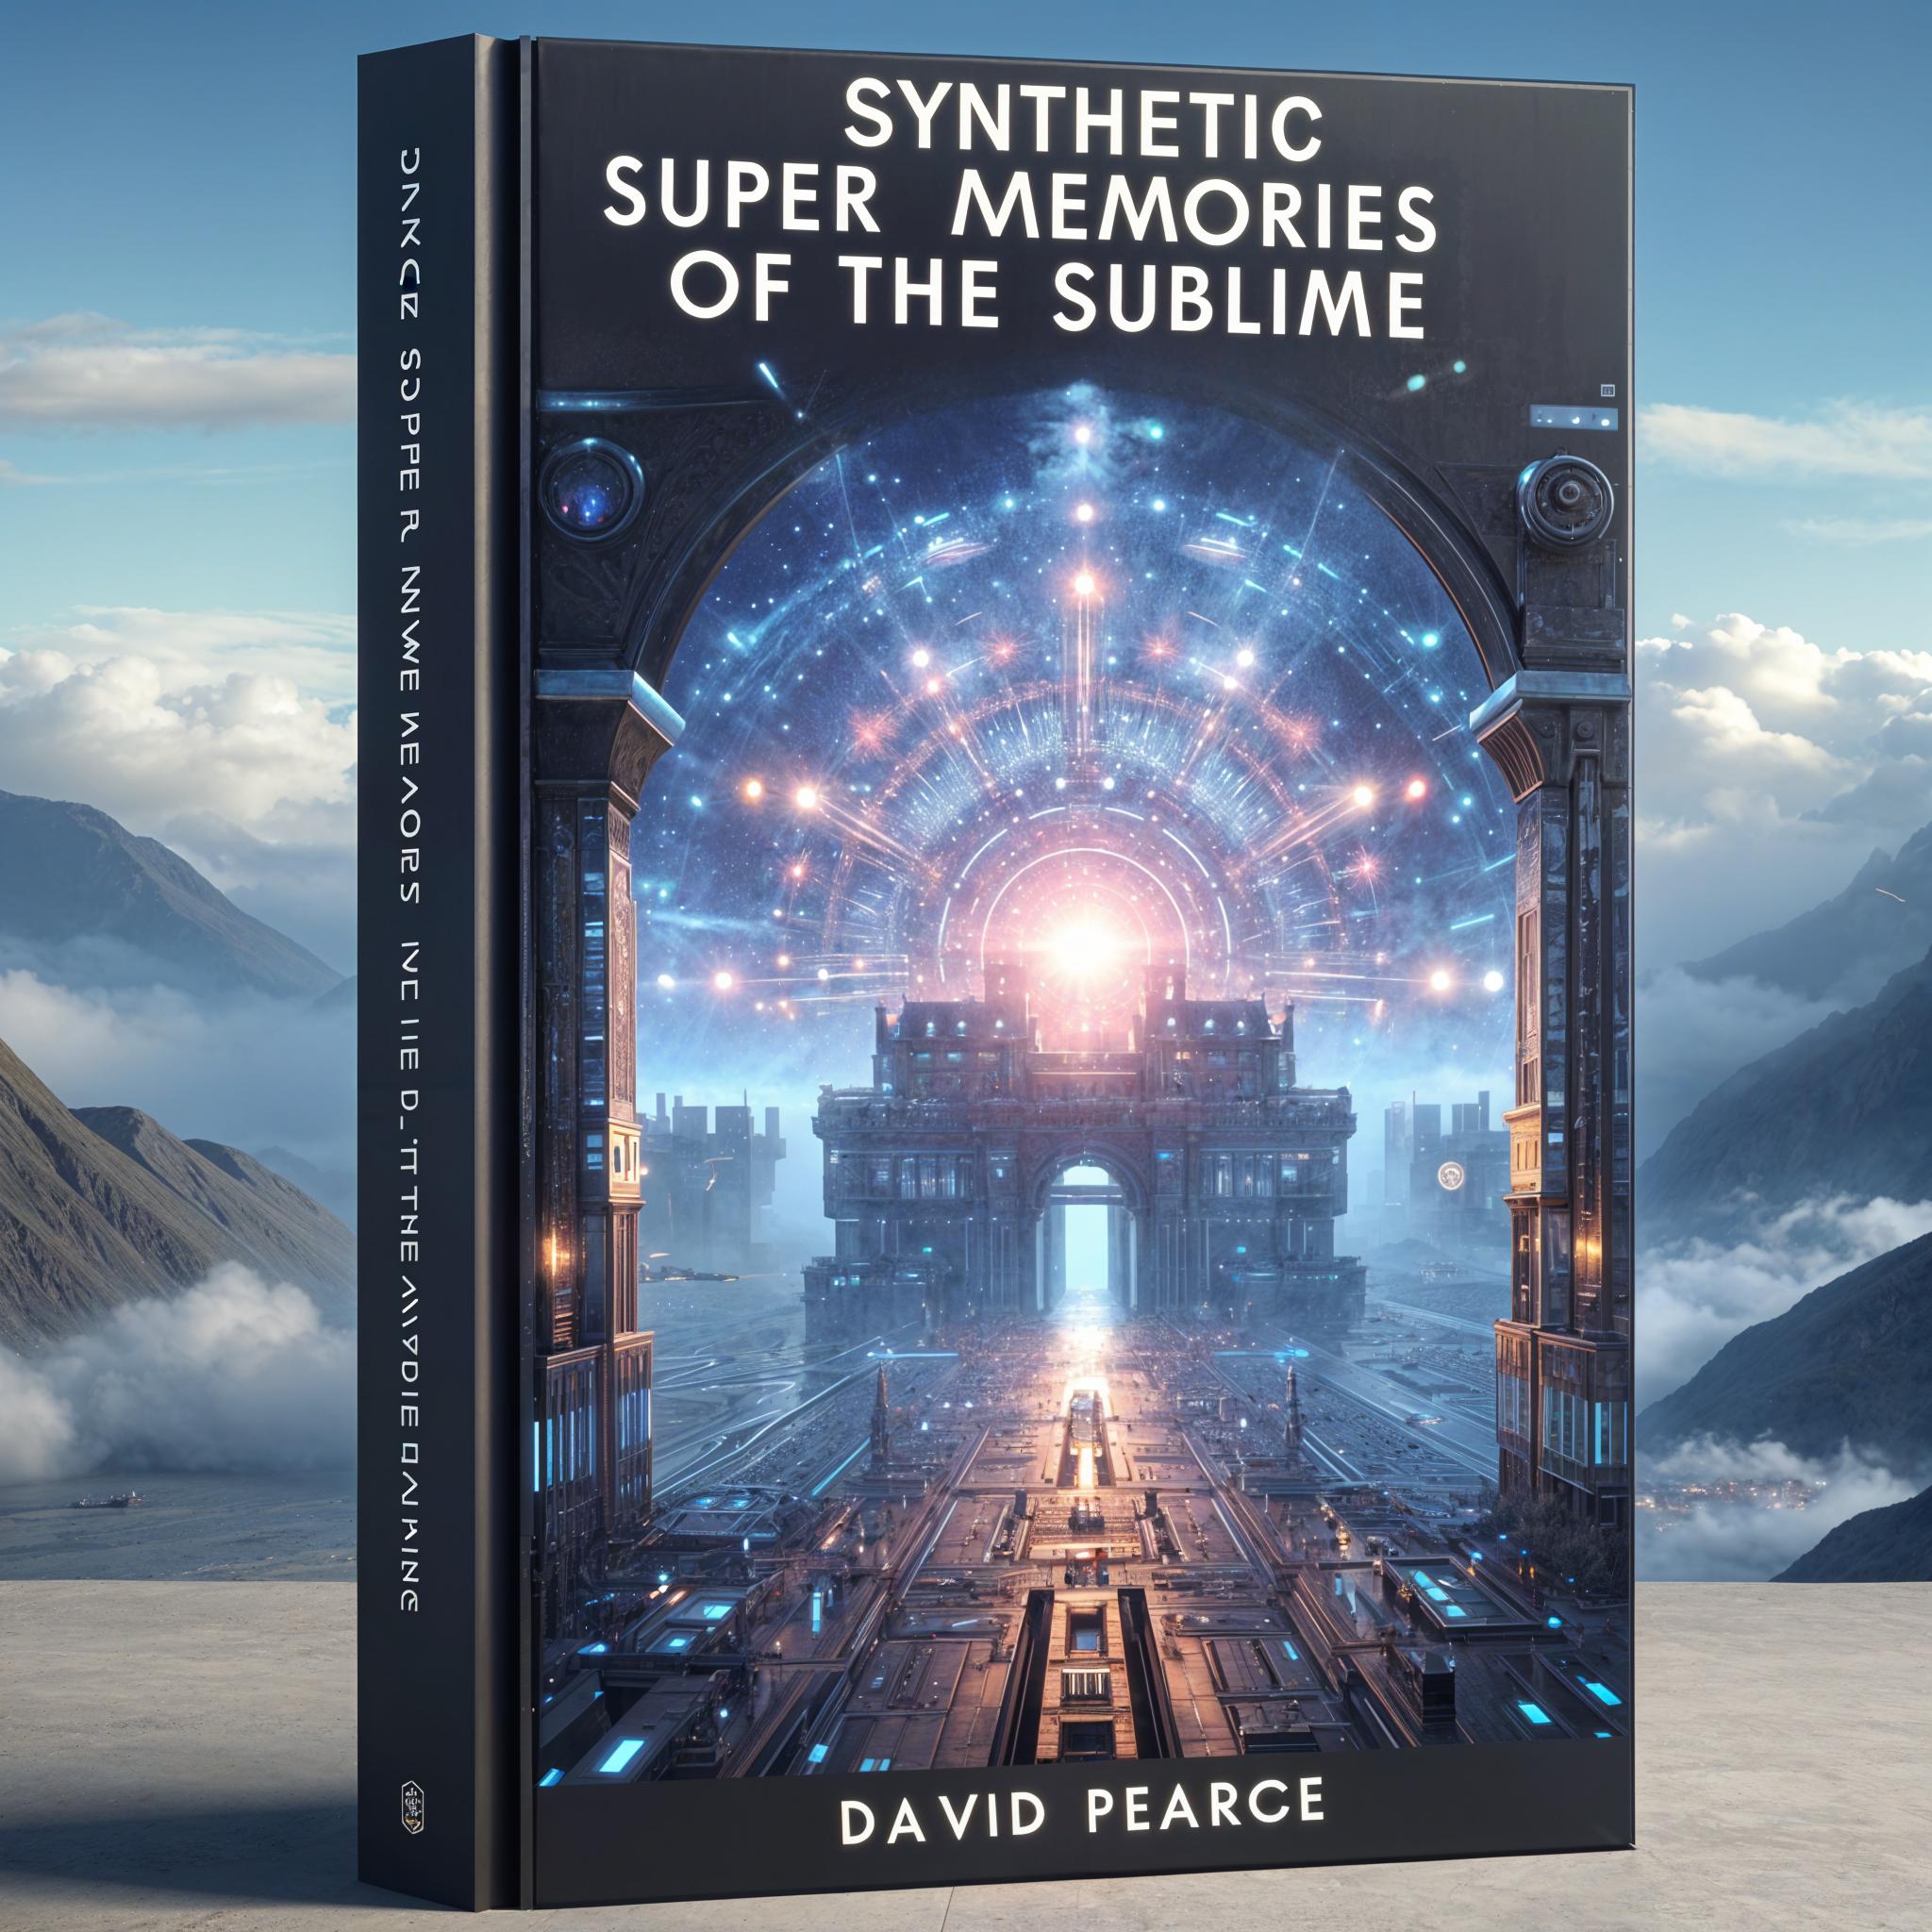 Synthetic Super-Memories of the Sublime by David Pearce